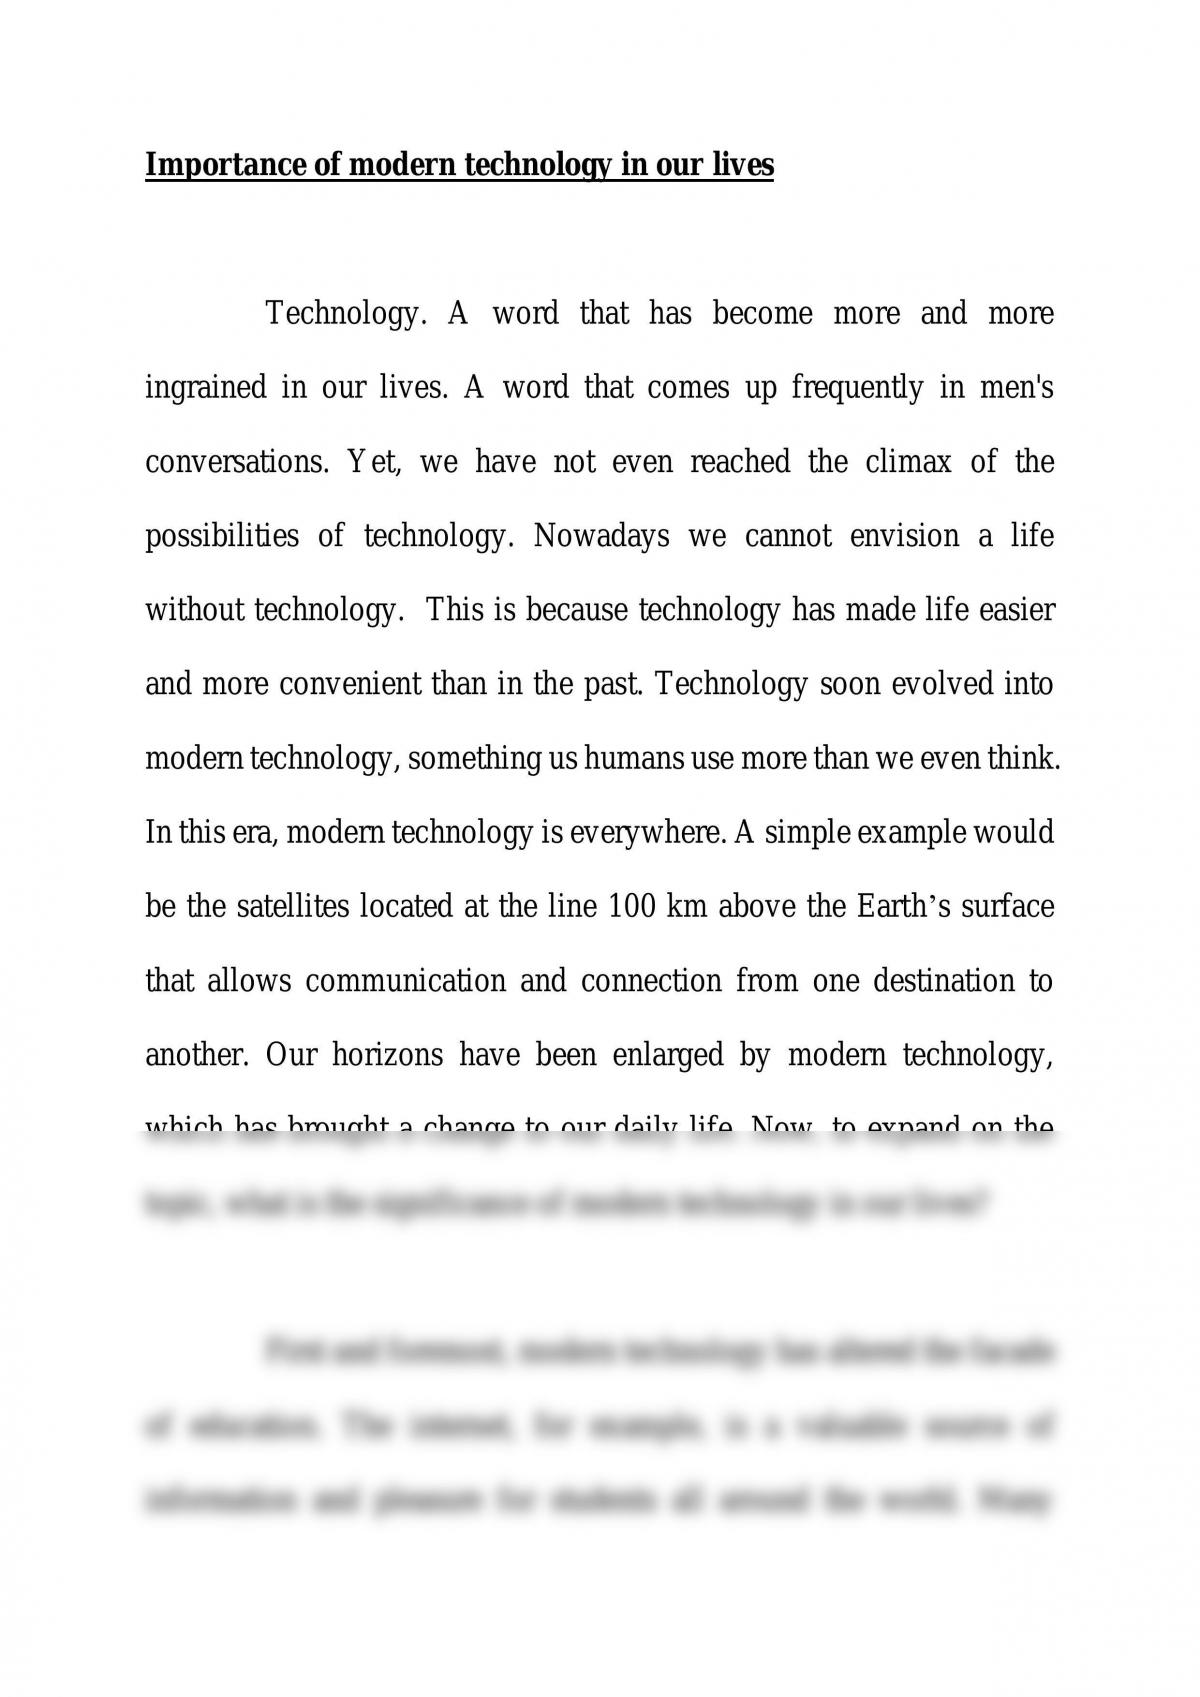 essay of the modern technology